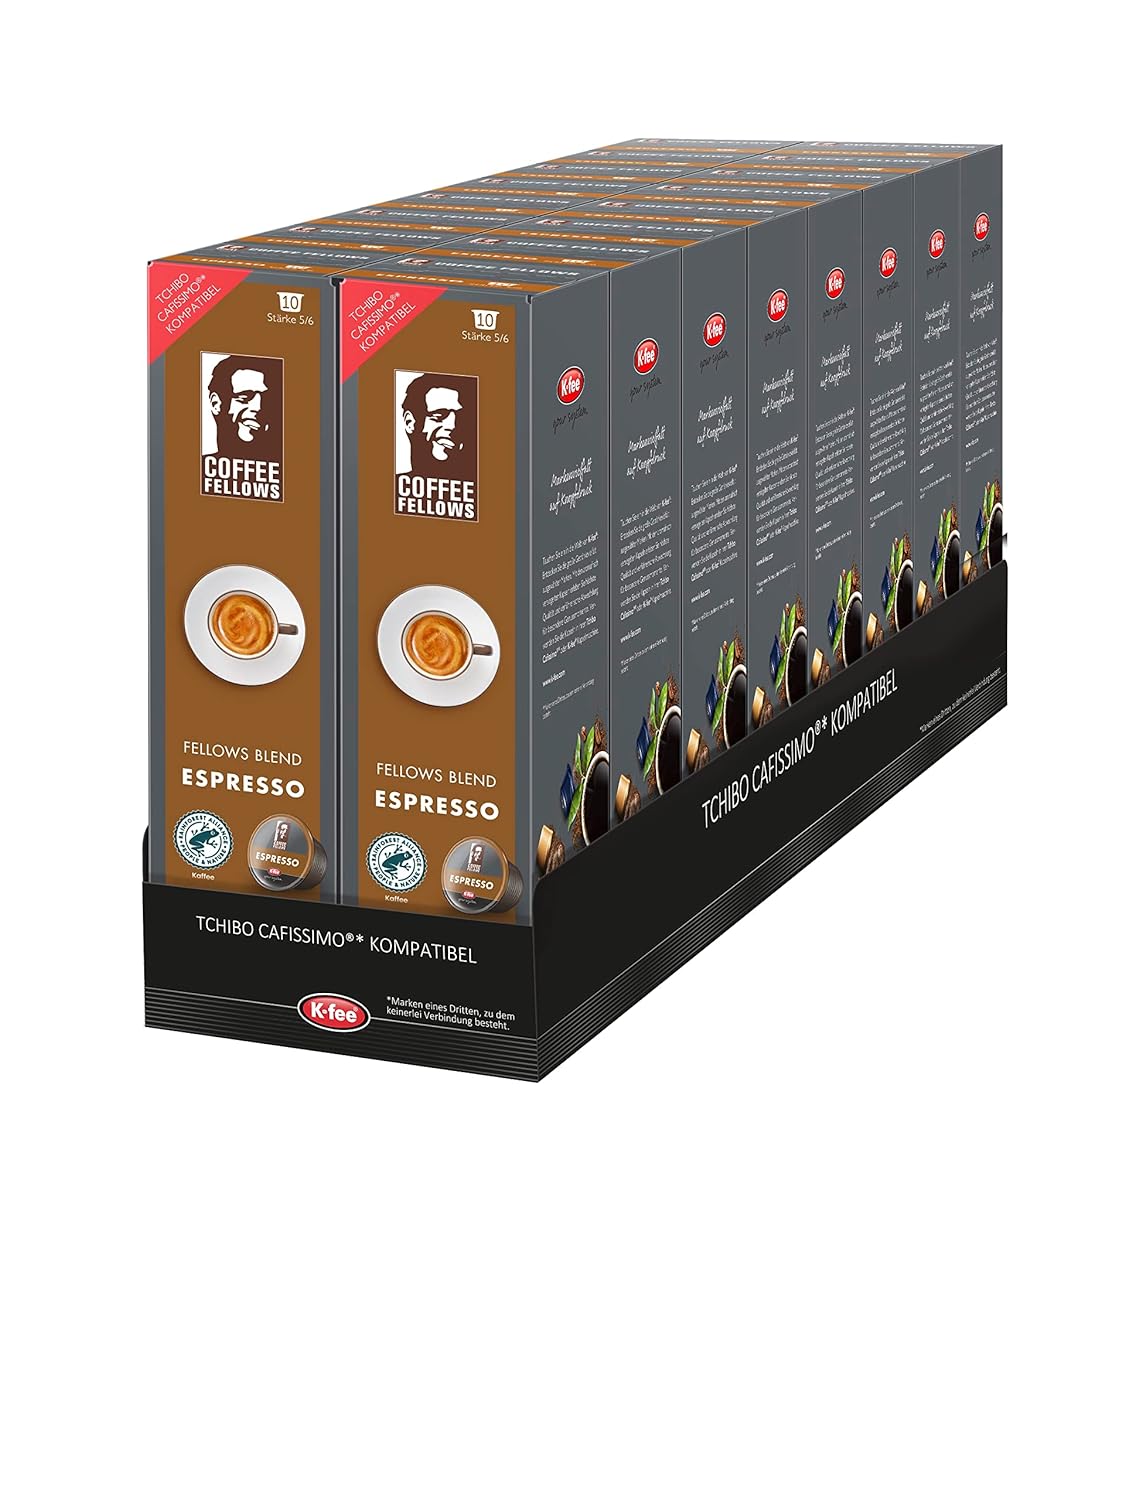 K-Fee Coffee Fellows Blend Espresso coffee capsules | Intensity 5/6 | Compatible with K-Fee & Tchibo Cafissimo®* | chocolate-fruity flavors | 120 capsules (12 x 10 pieces)